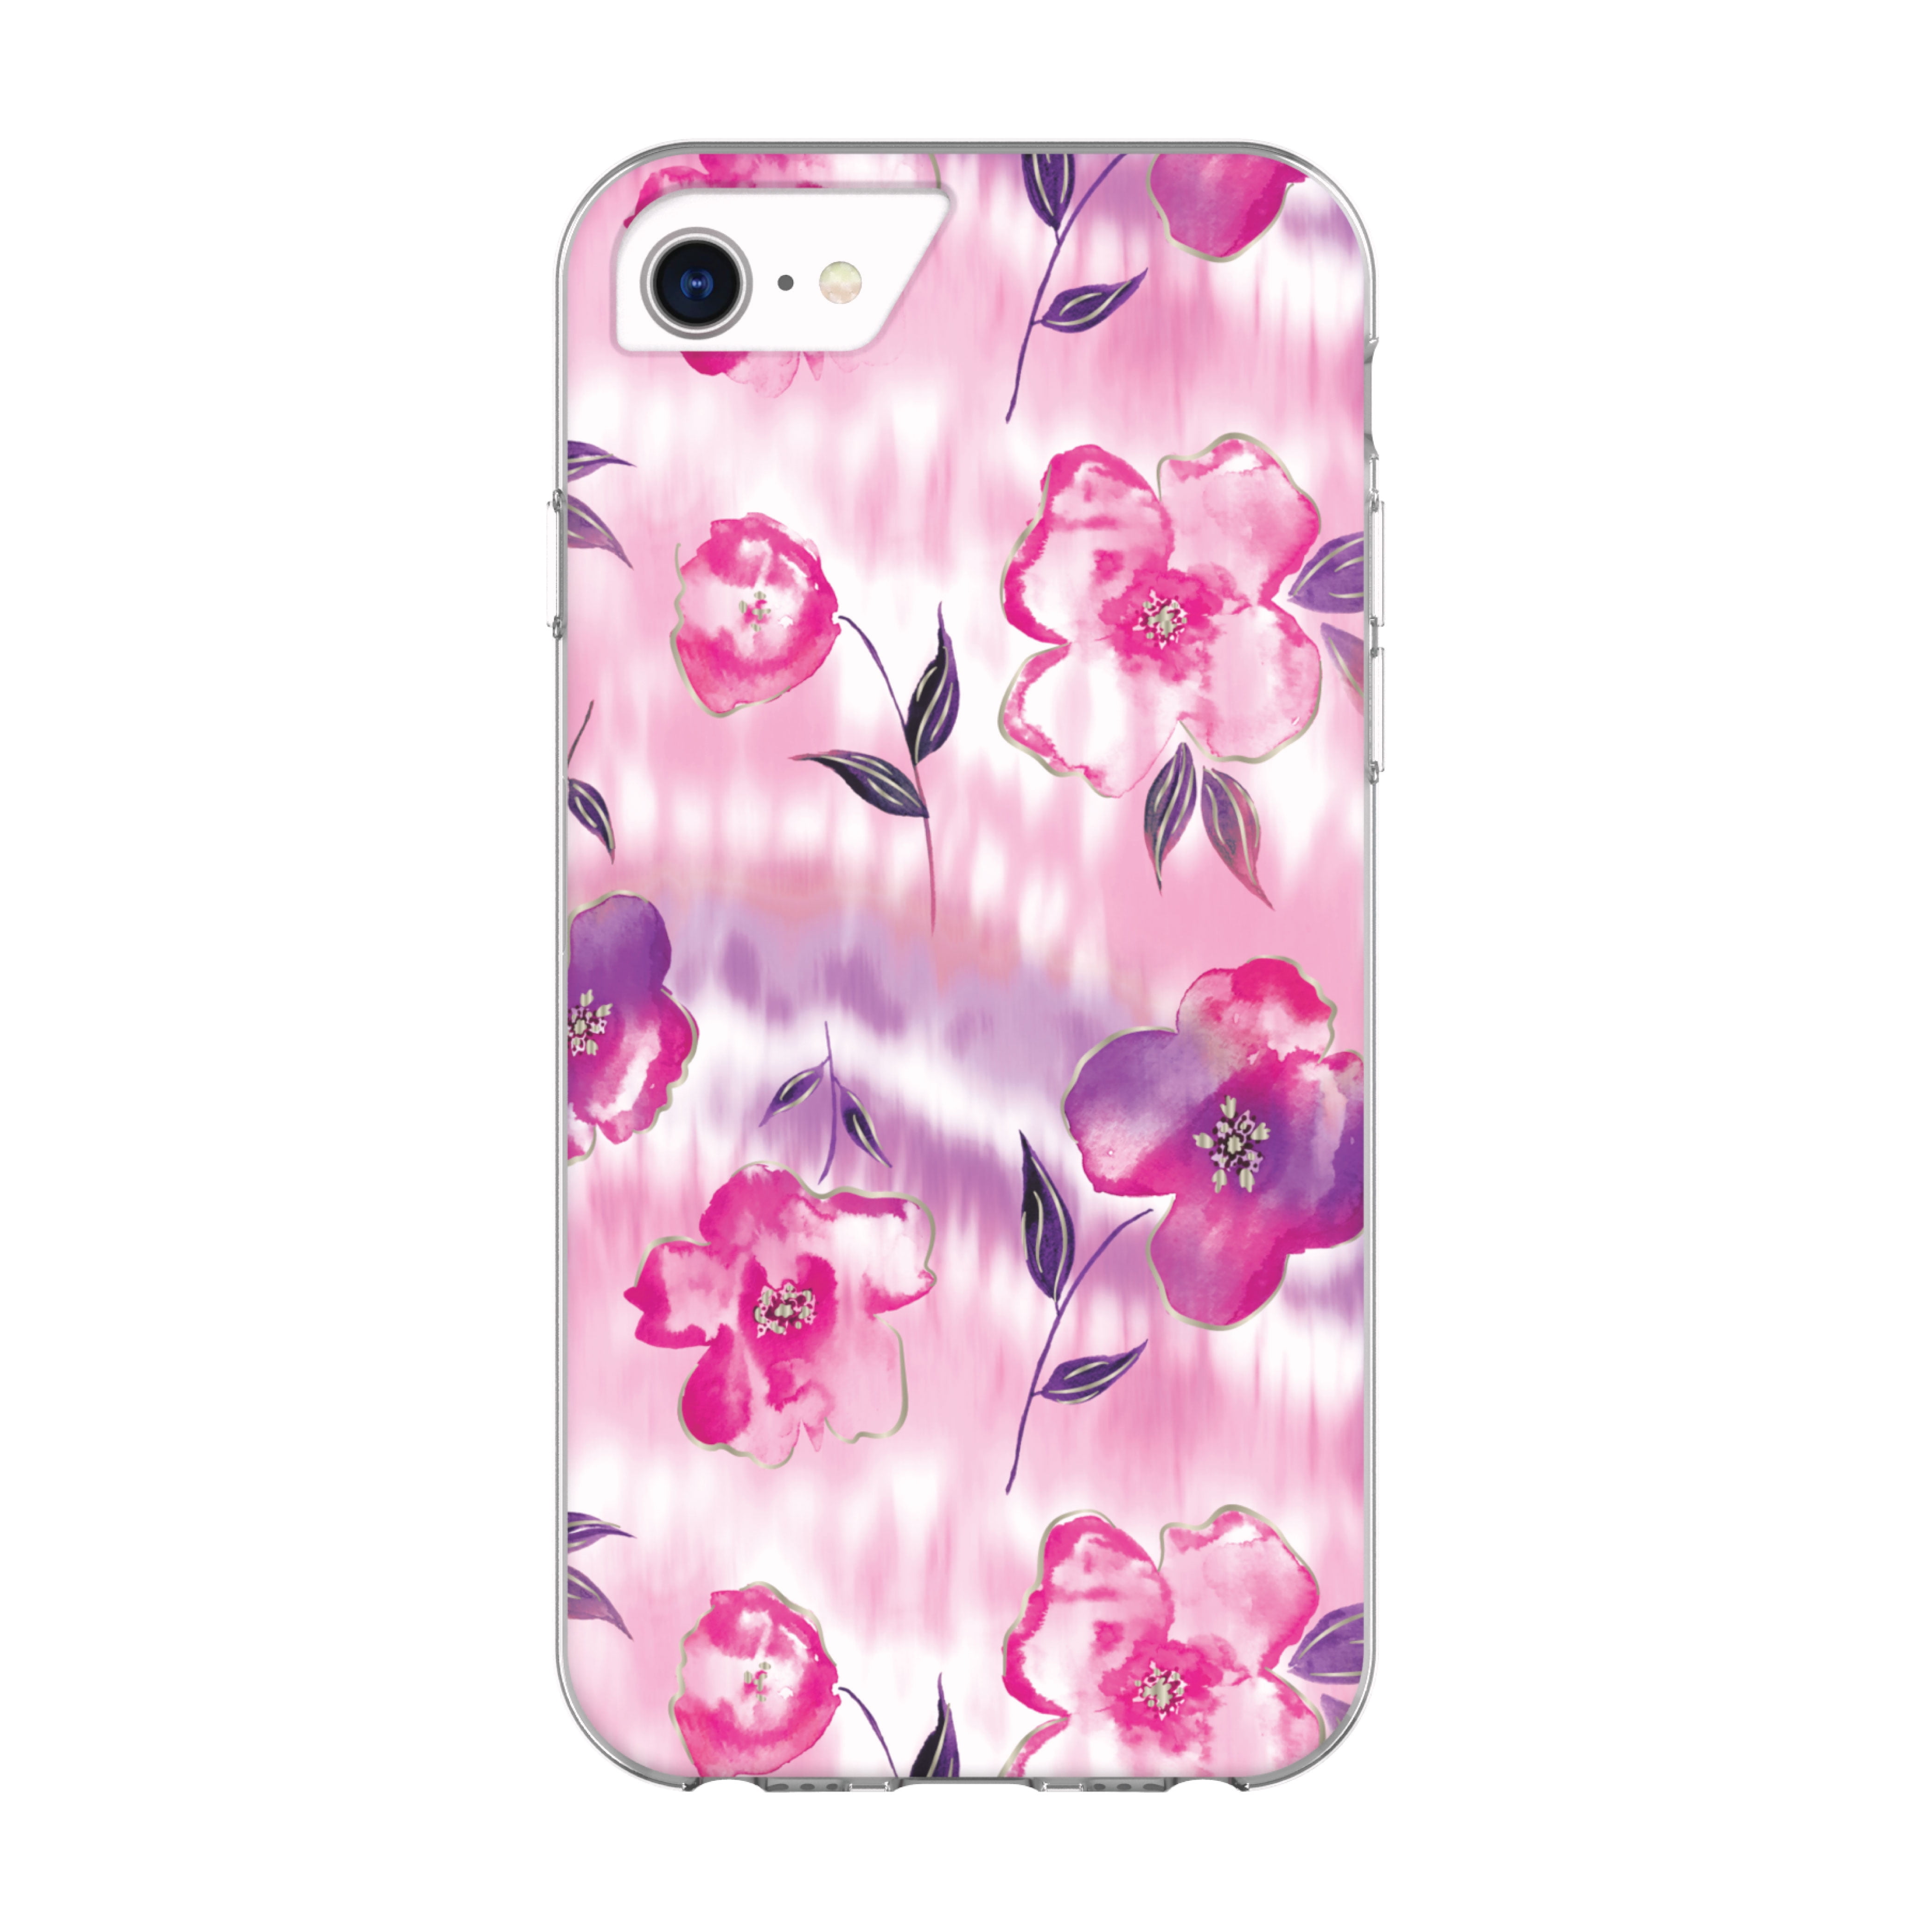 onn. Bright Floral Phone Case for iPhone 6/7/8/SE